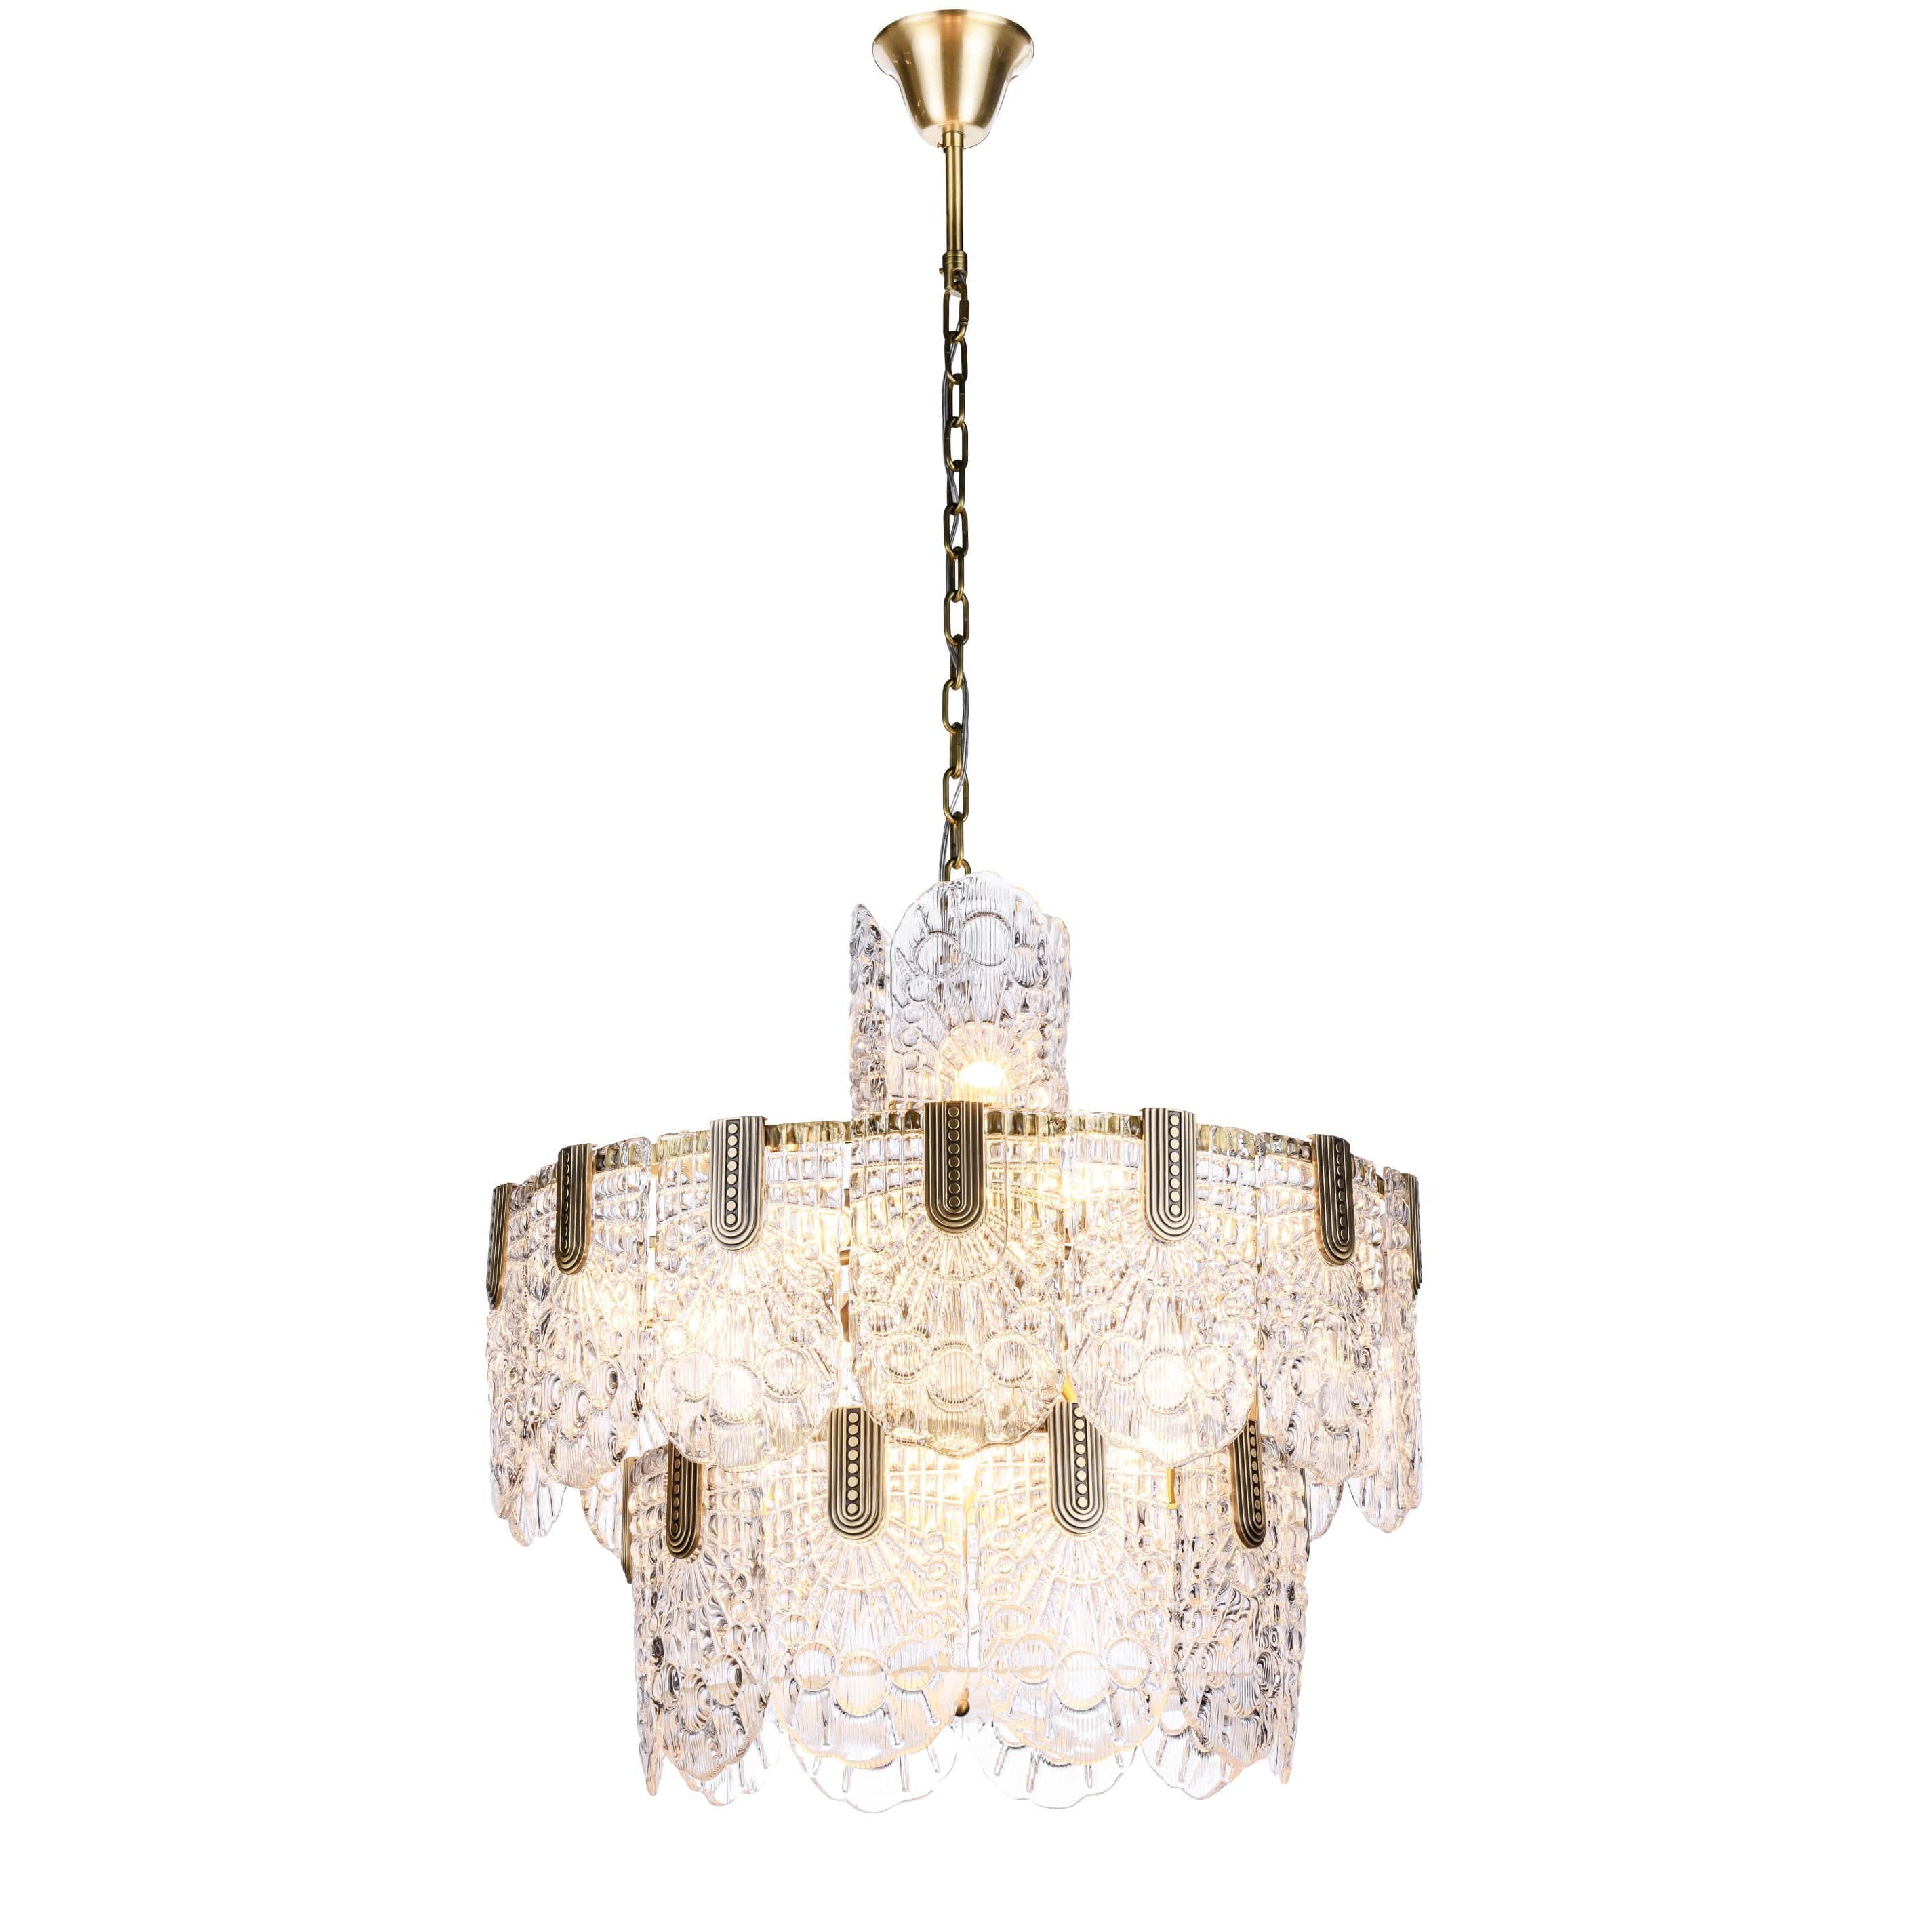 Jacques Brass Crystal Round Chandelier - Italian Concept